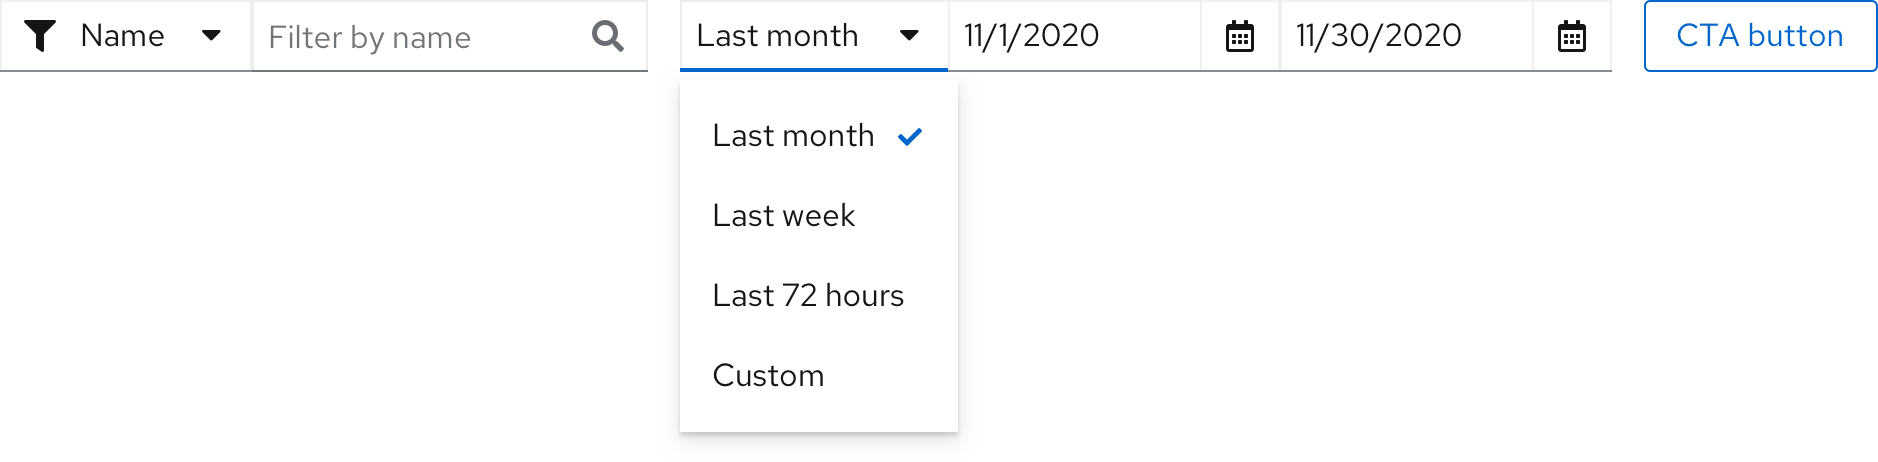 Example of date picker in toolbar filter group - two liner